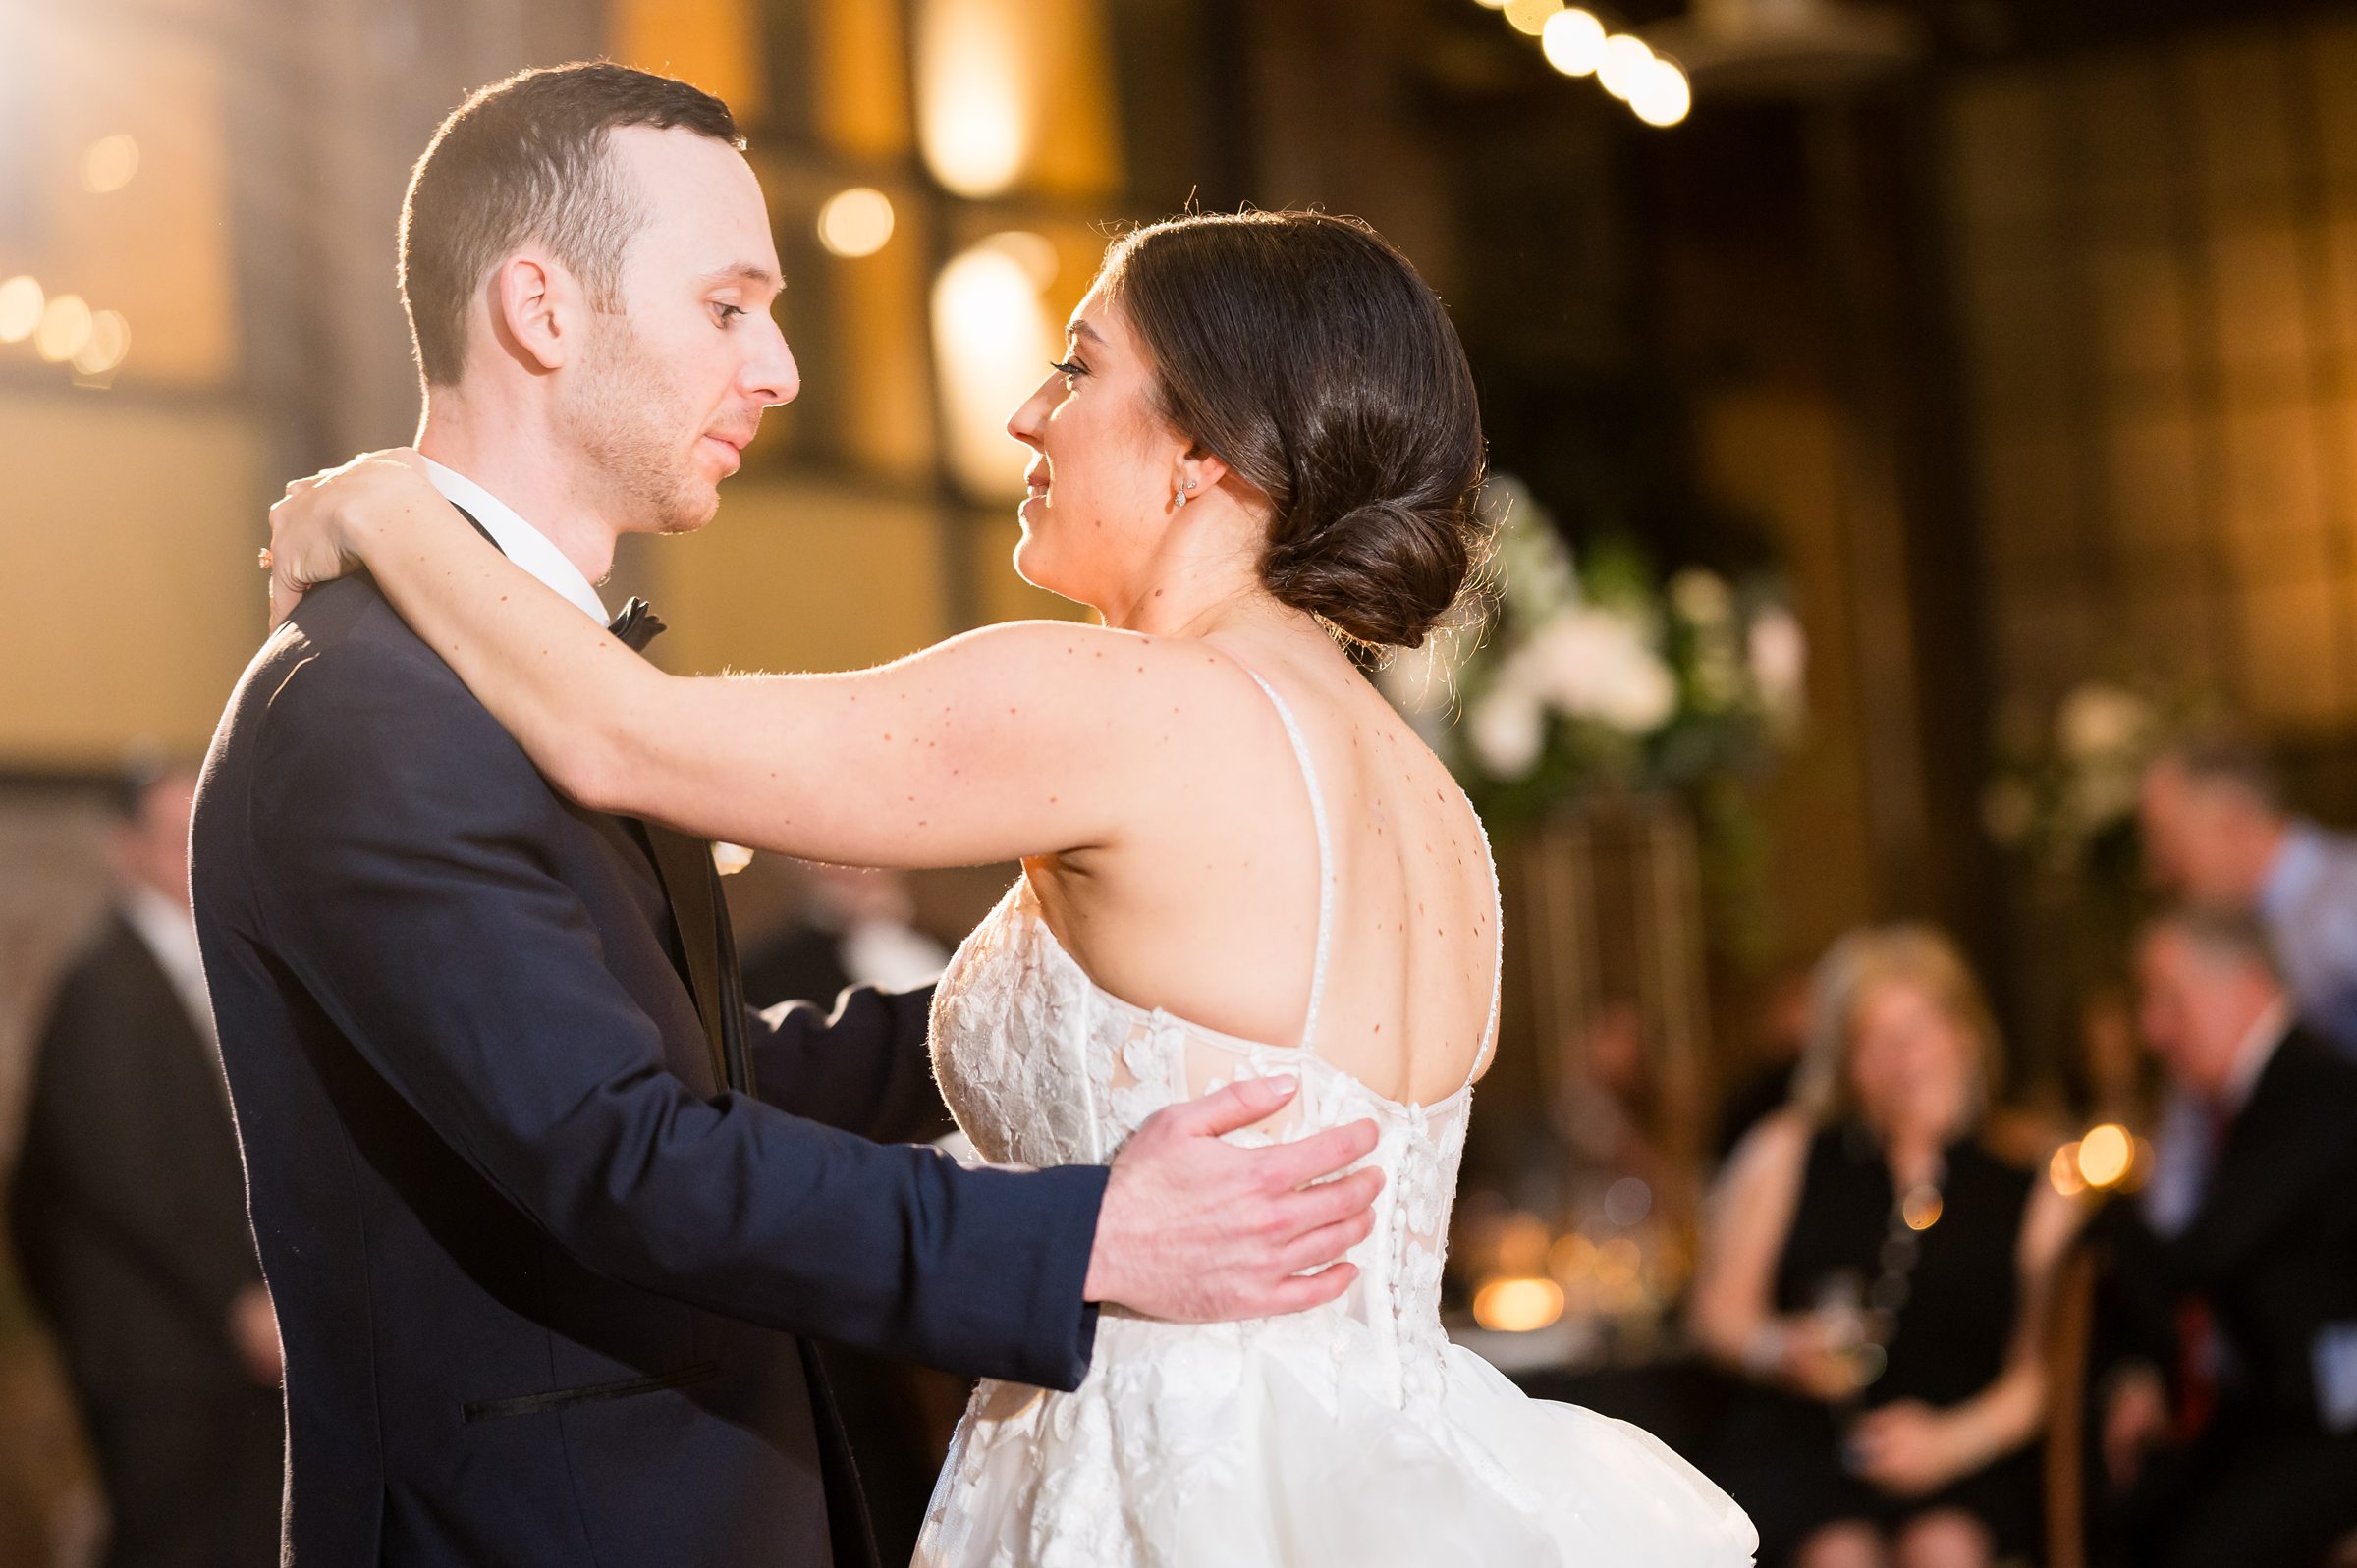 At a Lilah Events wedding, the bride and groom gracefully share their first dance at the reception.